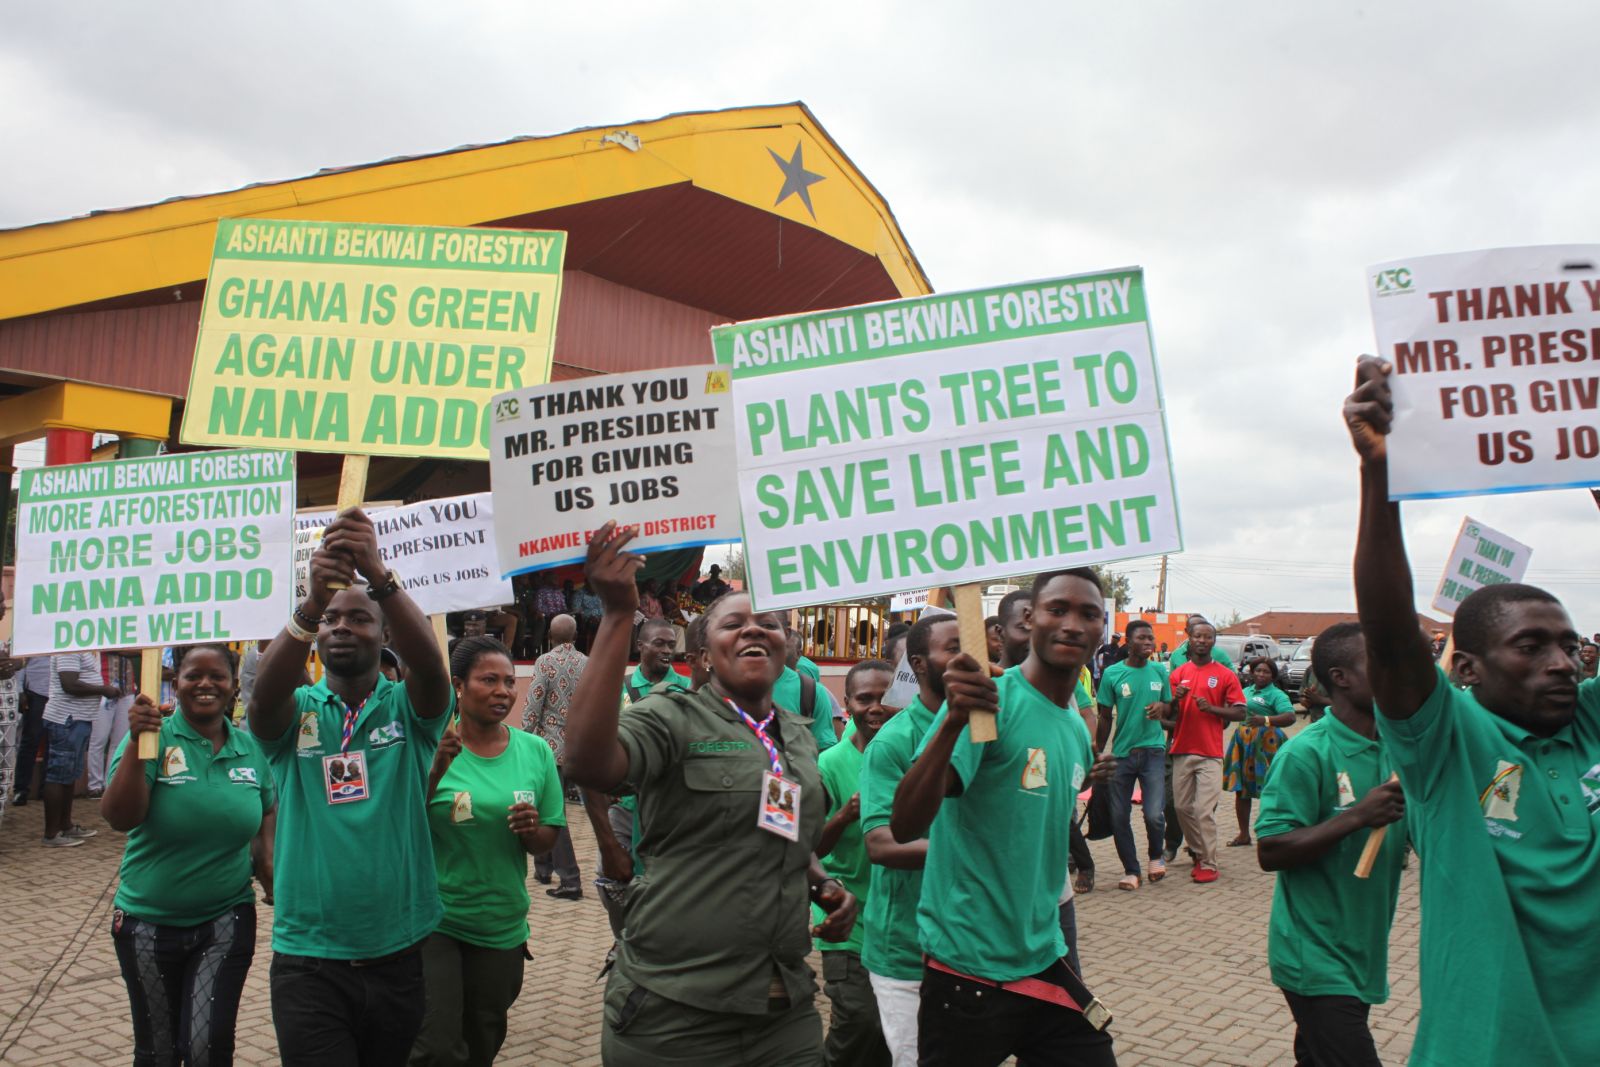 25k Trees Planted Under Youth-In-Afforestation Programme - NPP